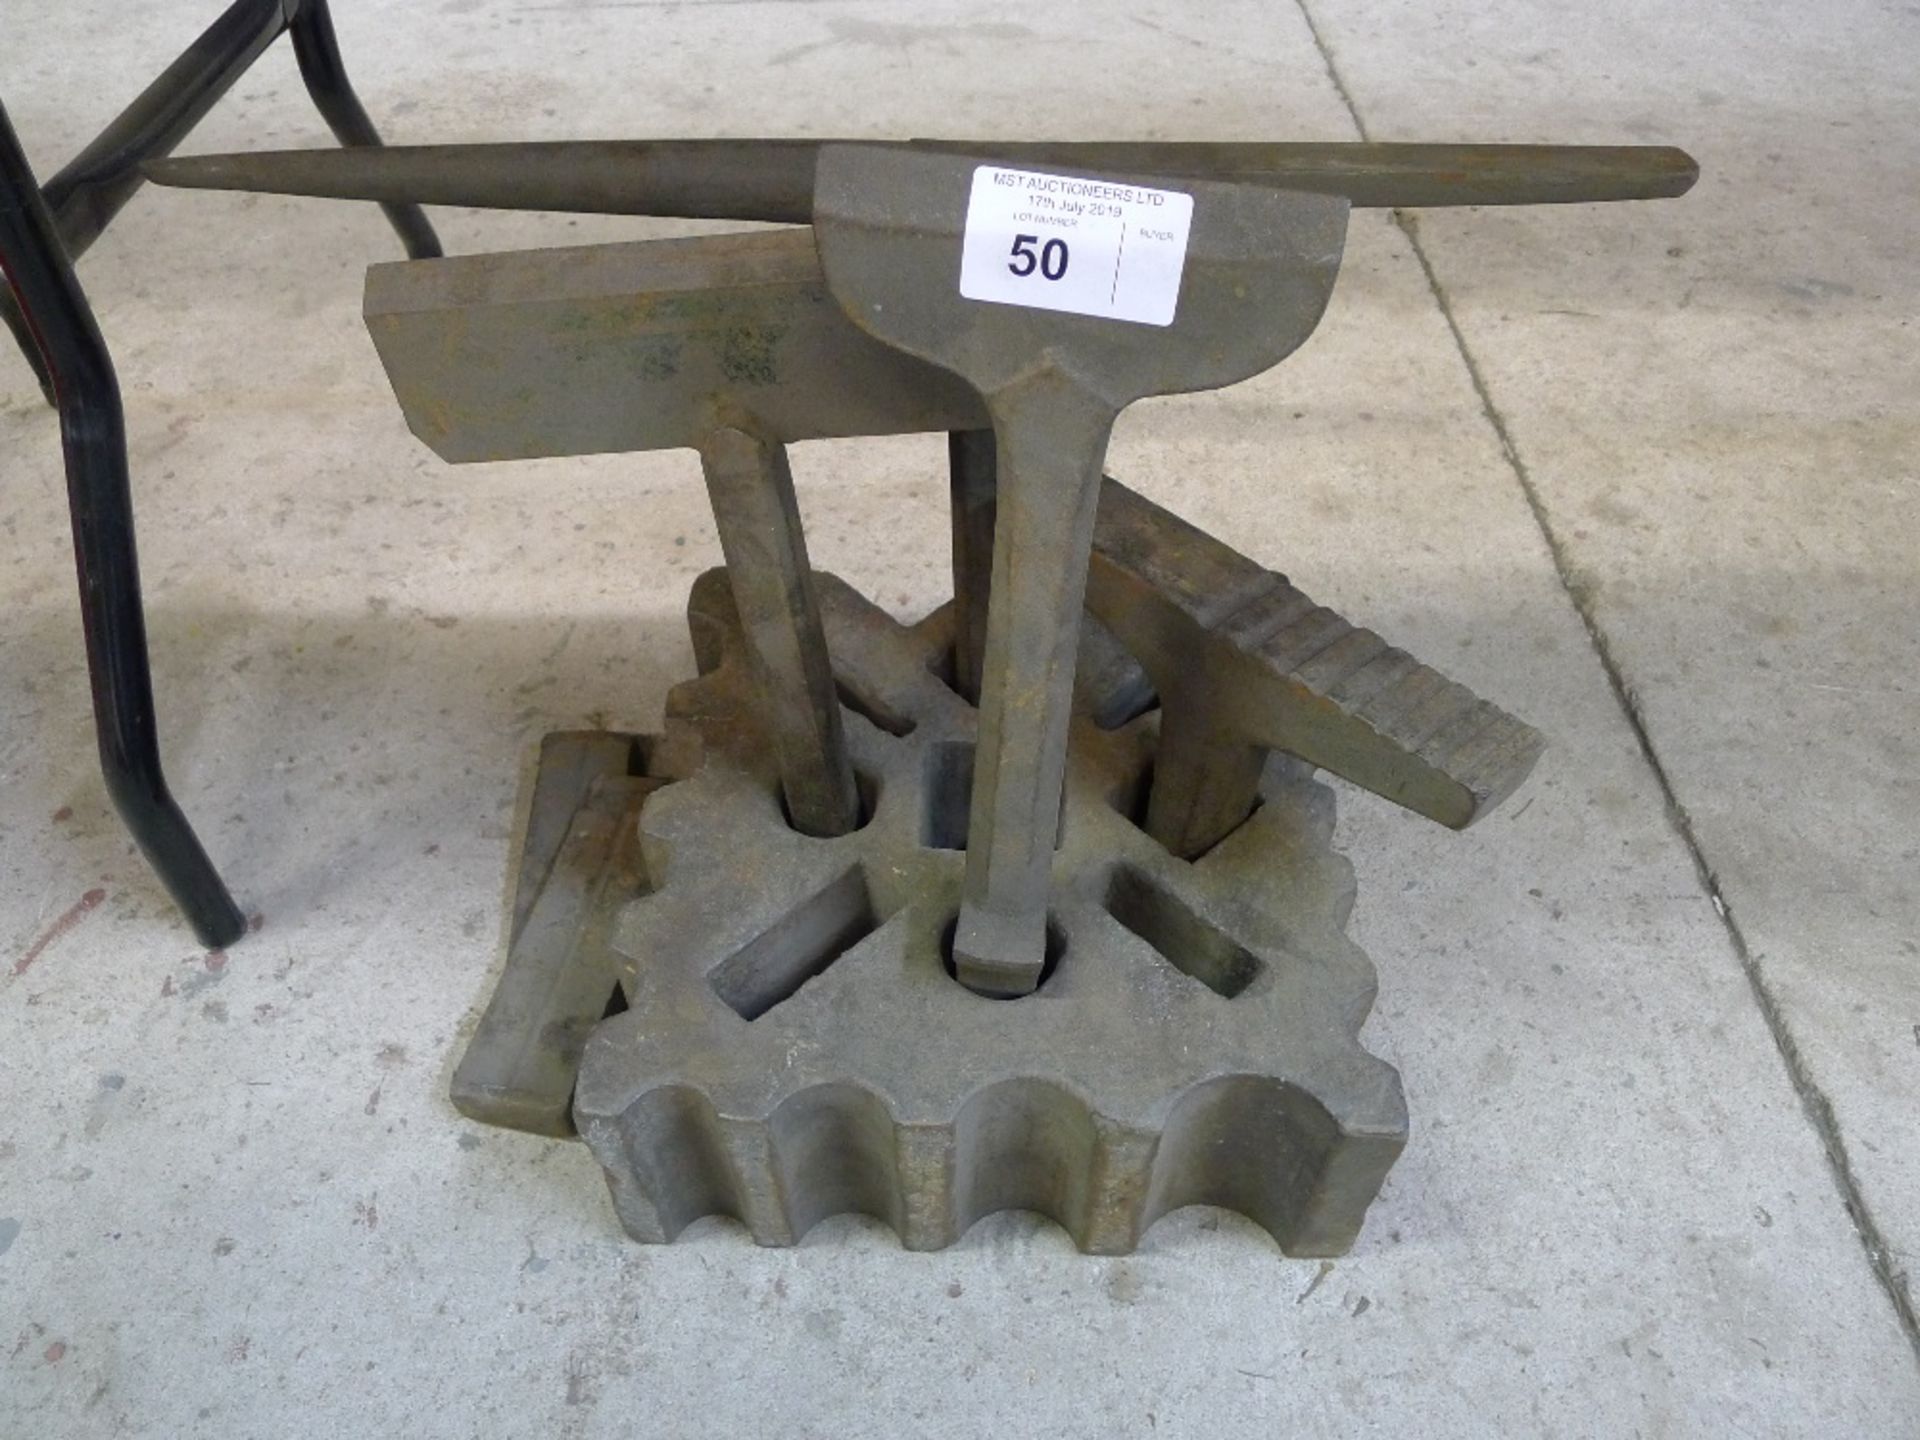 1 Blacksmiths swage block, 4 swage type tools and 2 wedges